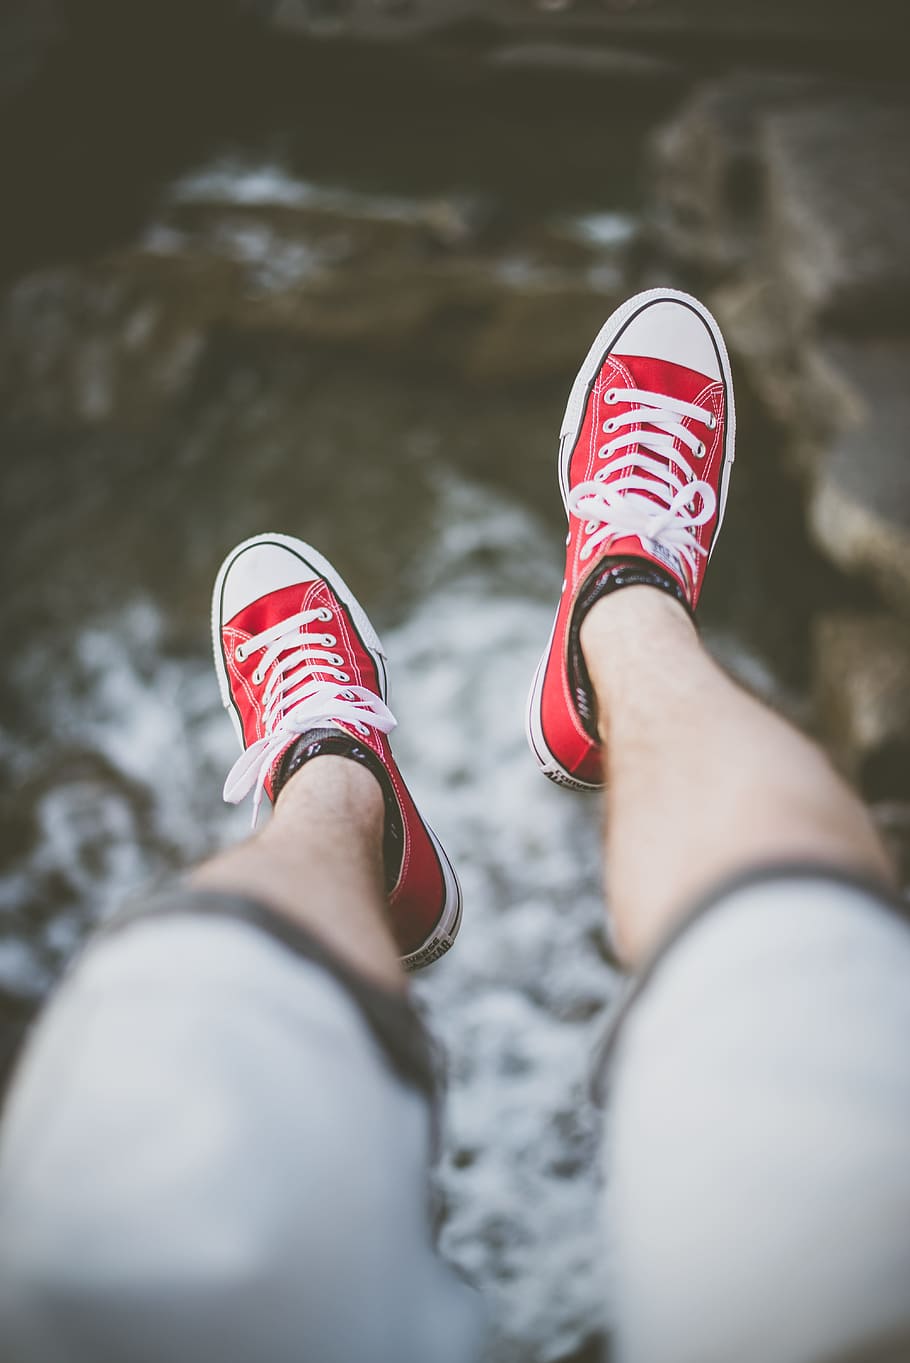 selective focus photography of person wearing red low-top sneakers over body of water, selective focus photography of man's feet wearing red lace-up low-top sneakers above body of water